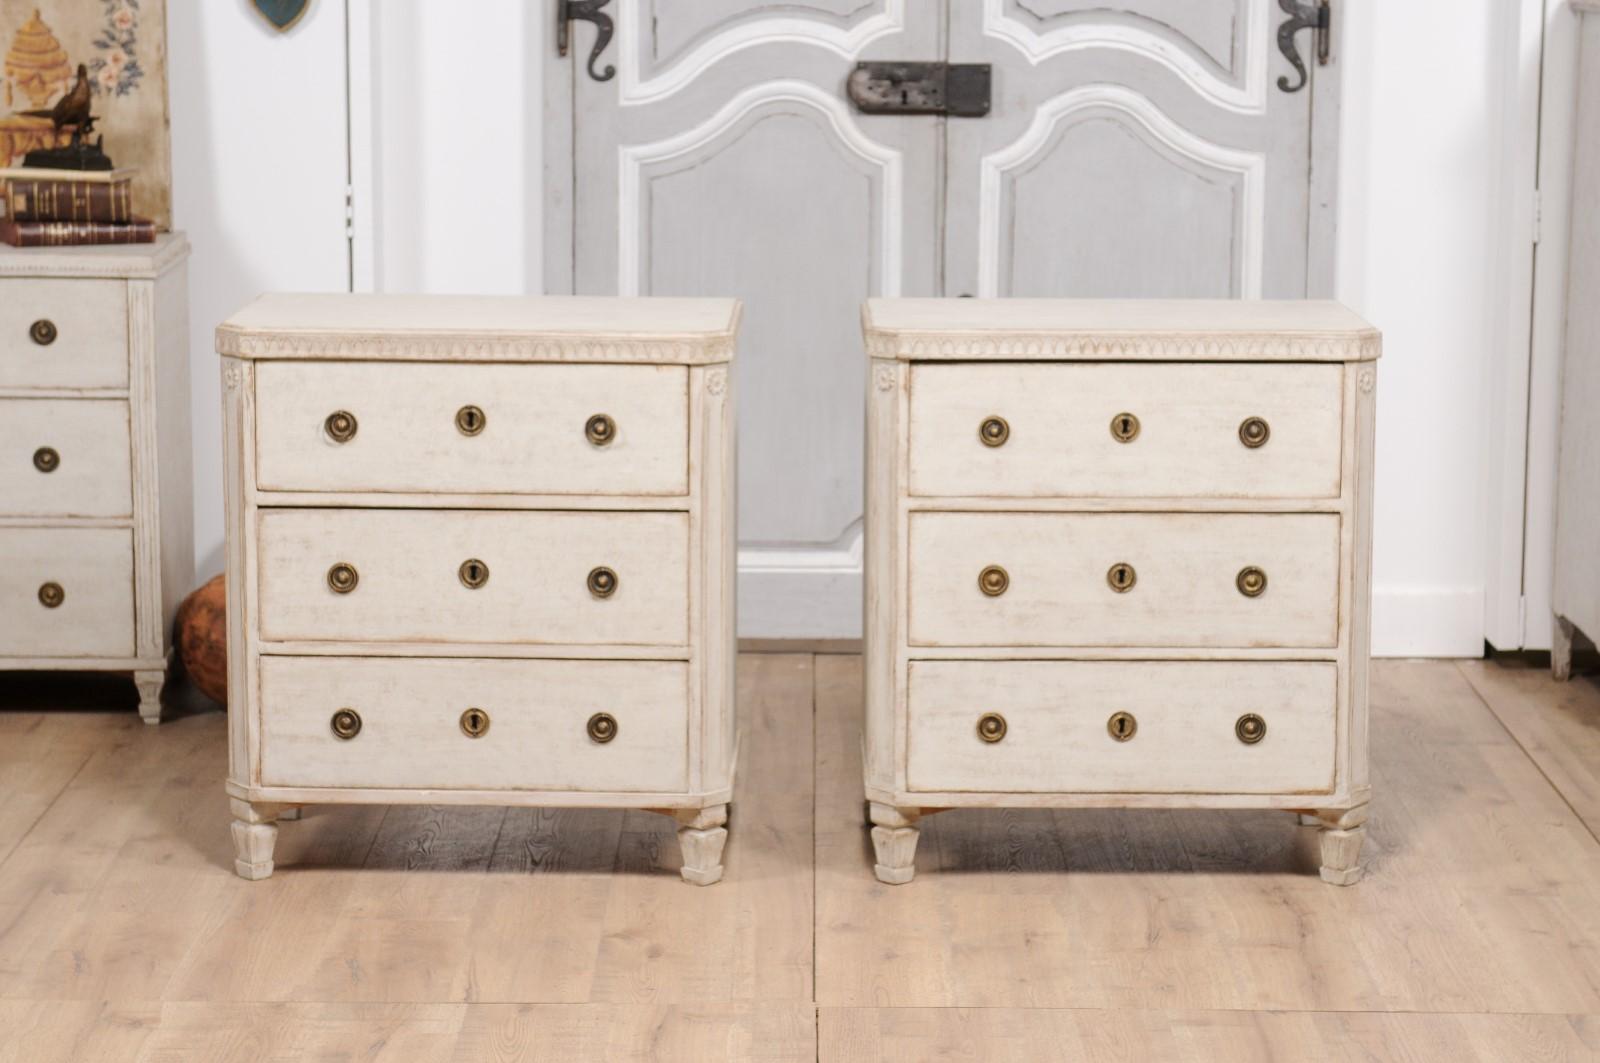 19th Century Gustavian Style 1880s Swedish Painted Three-Drawer Chests with Carved Friezes